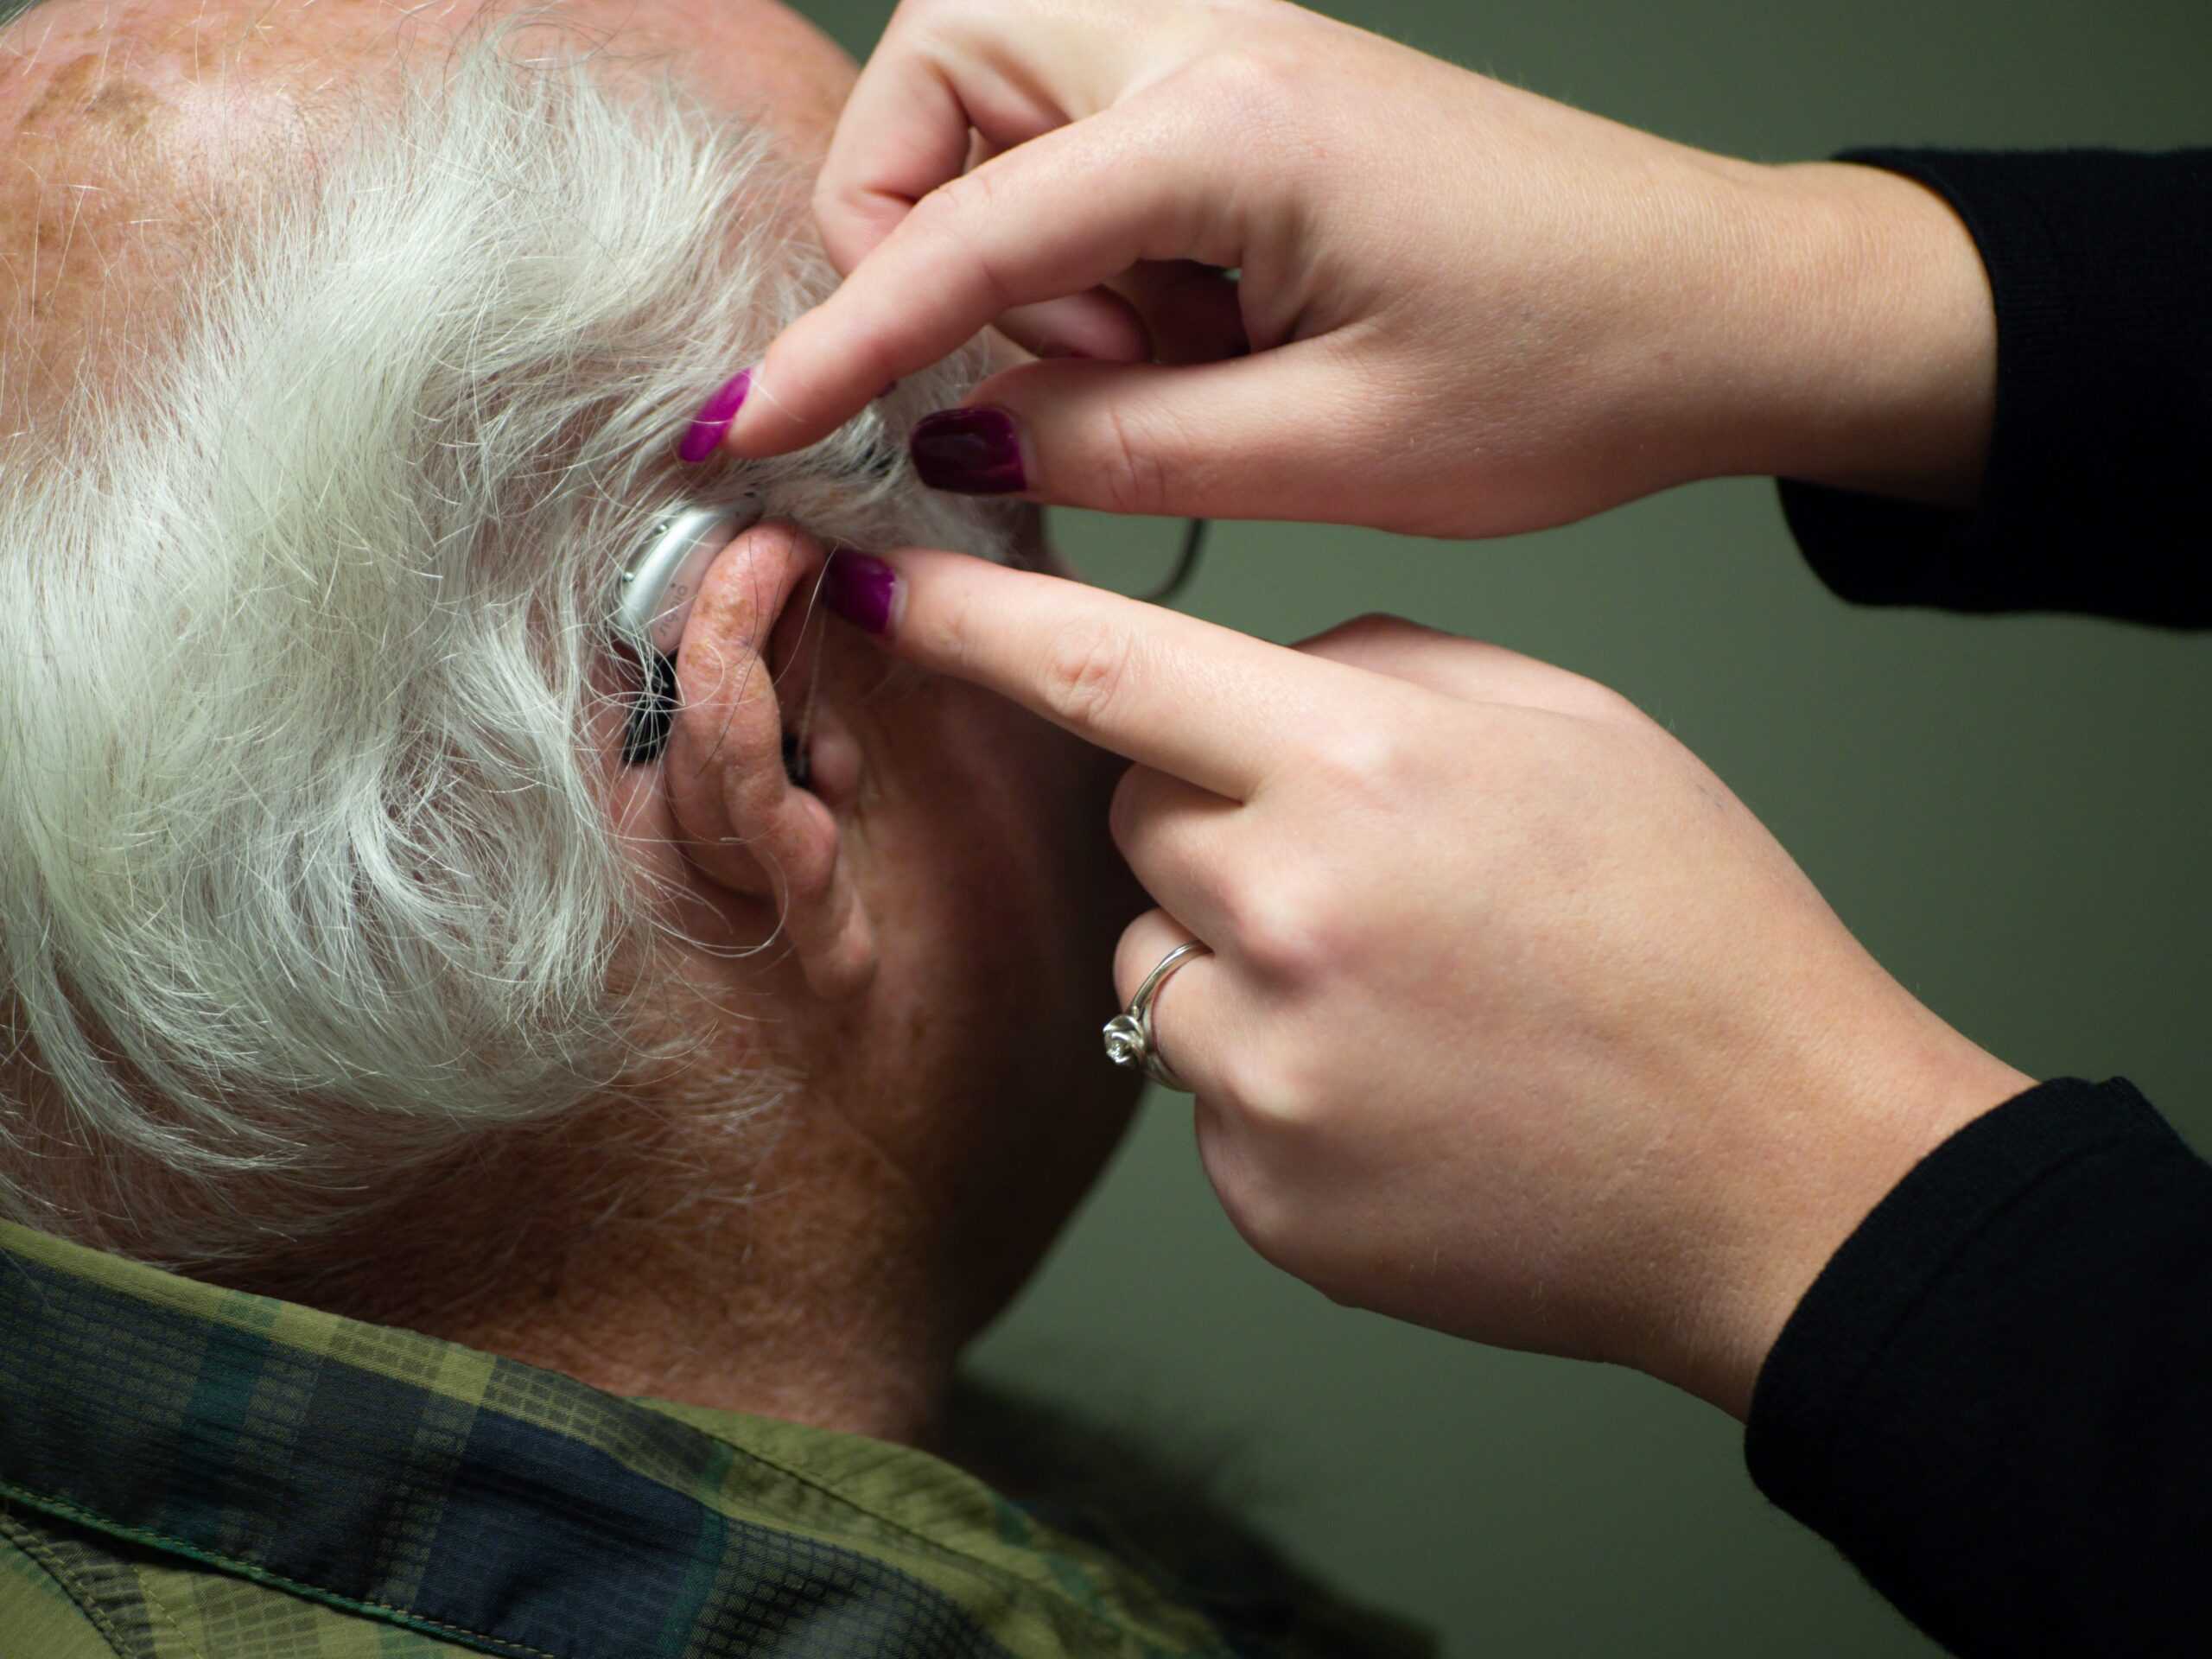 hearing expert helping with hearing aid